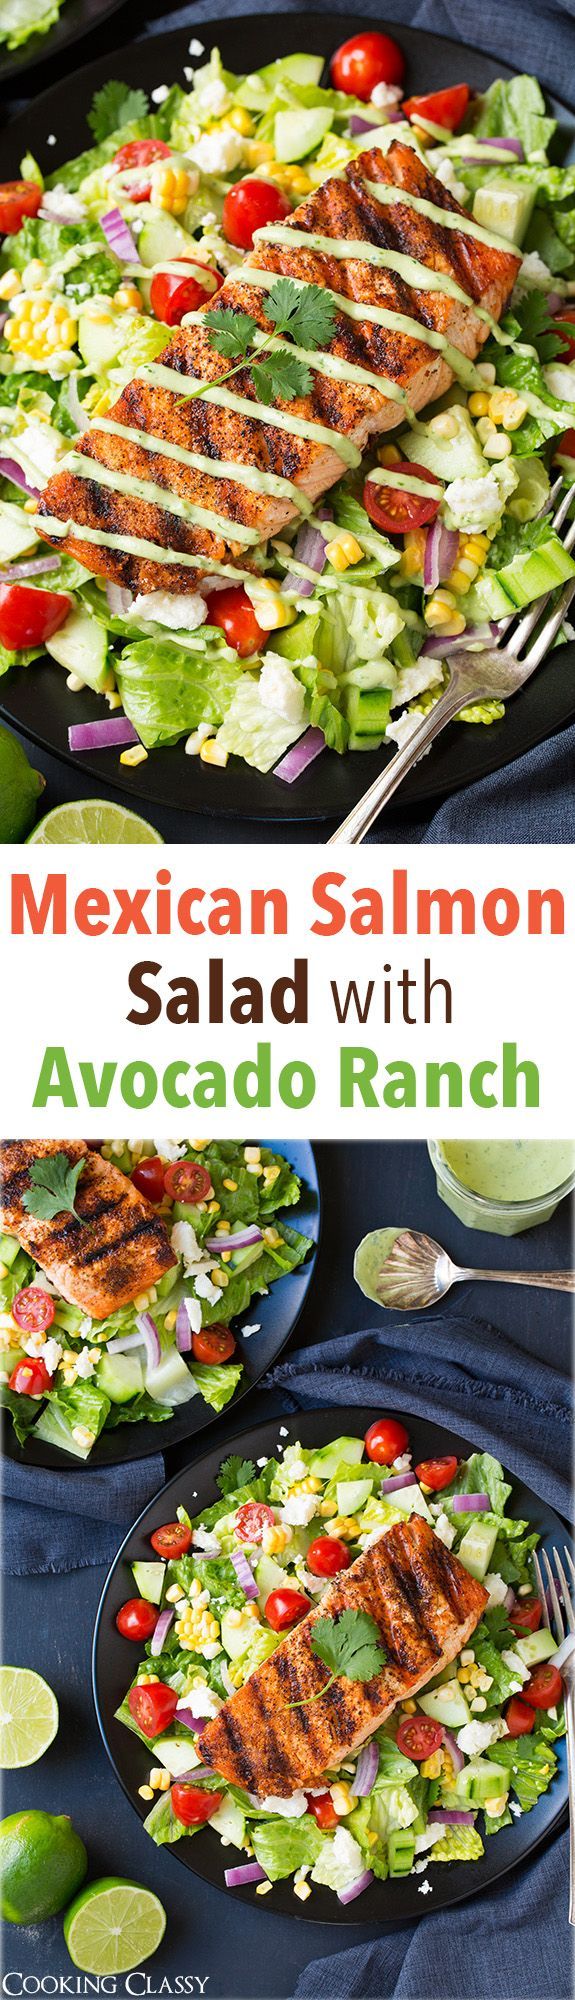 Mexican Grilled Salmon Salad with Greek Yogurt Avocado Ranch – This salad is seriously amazing!! Love all the flavors especially